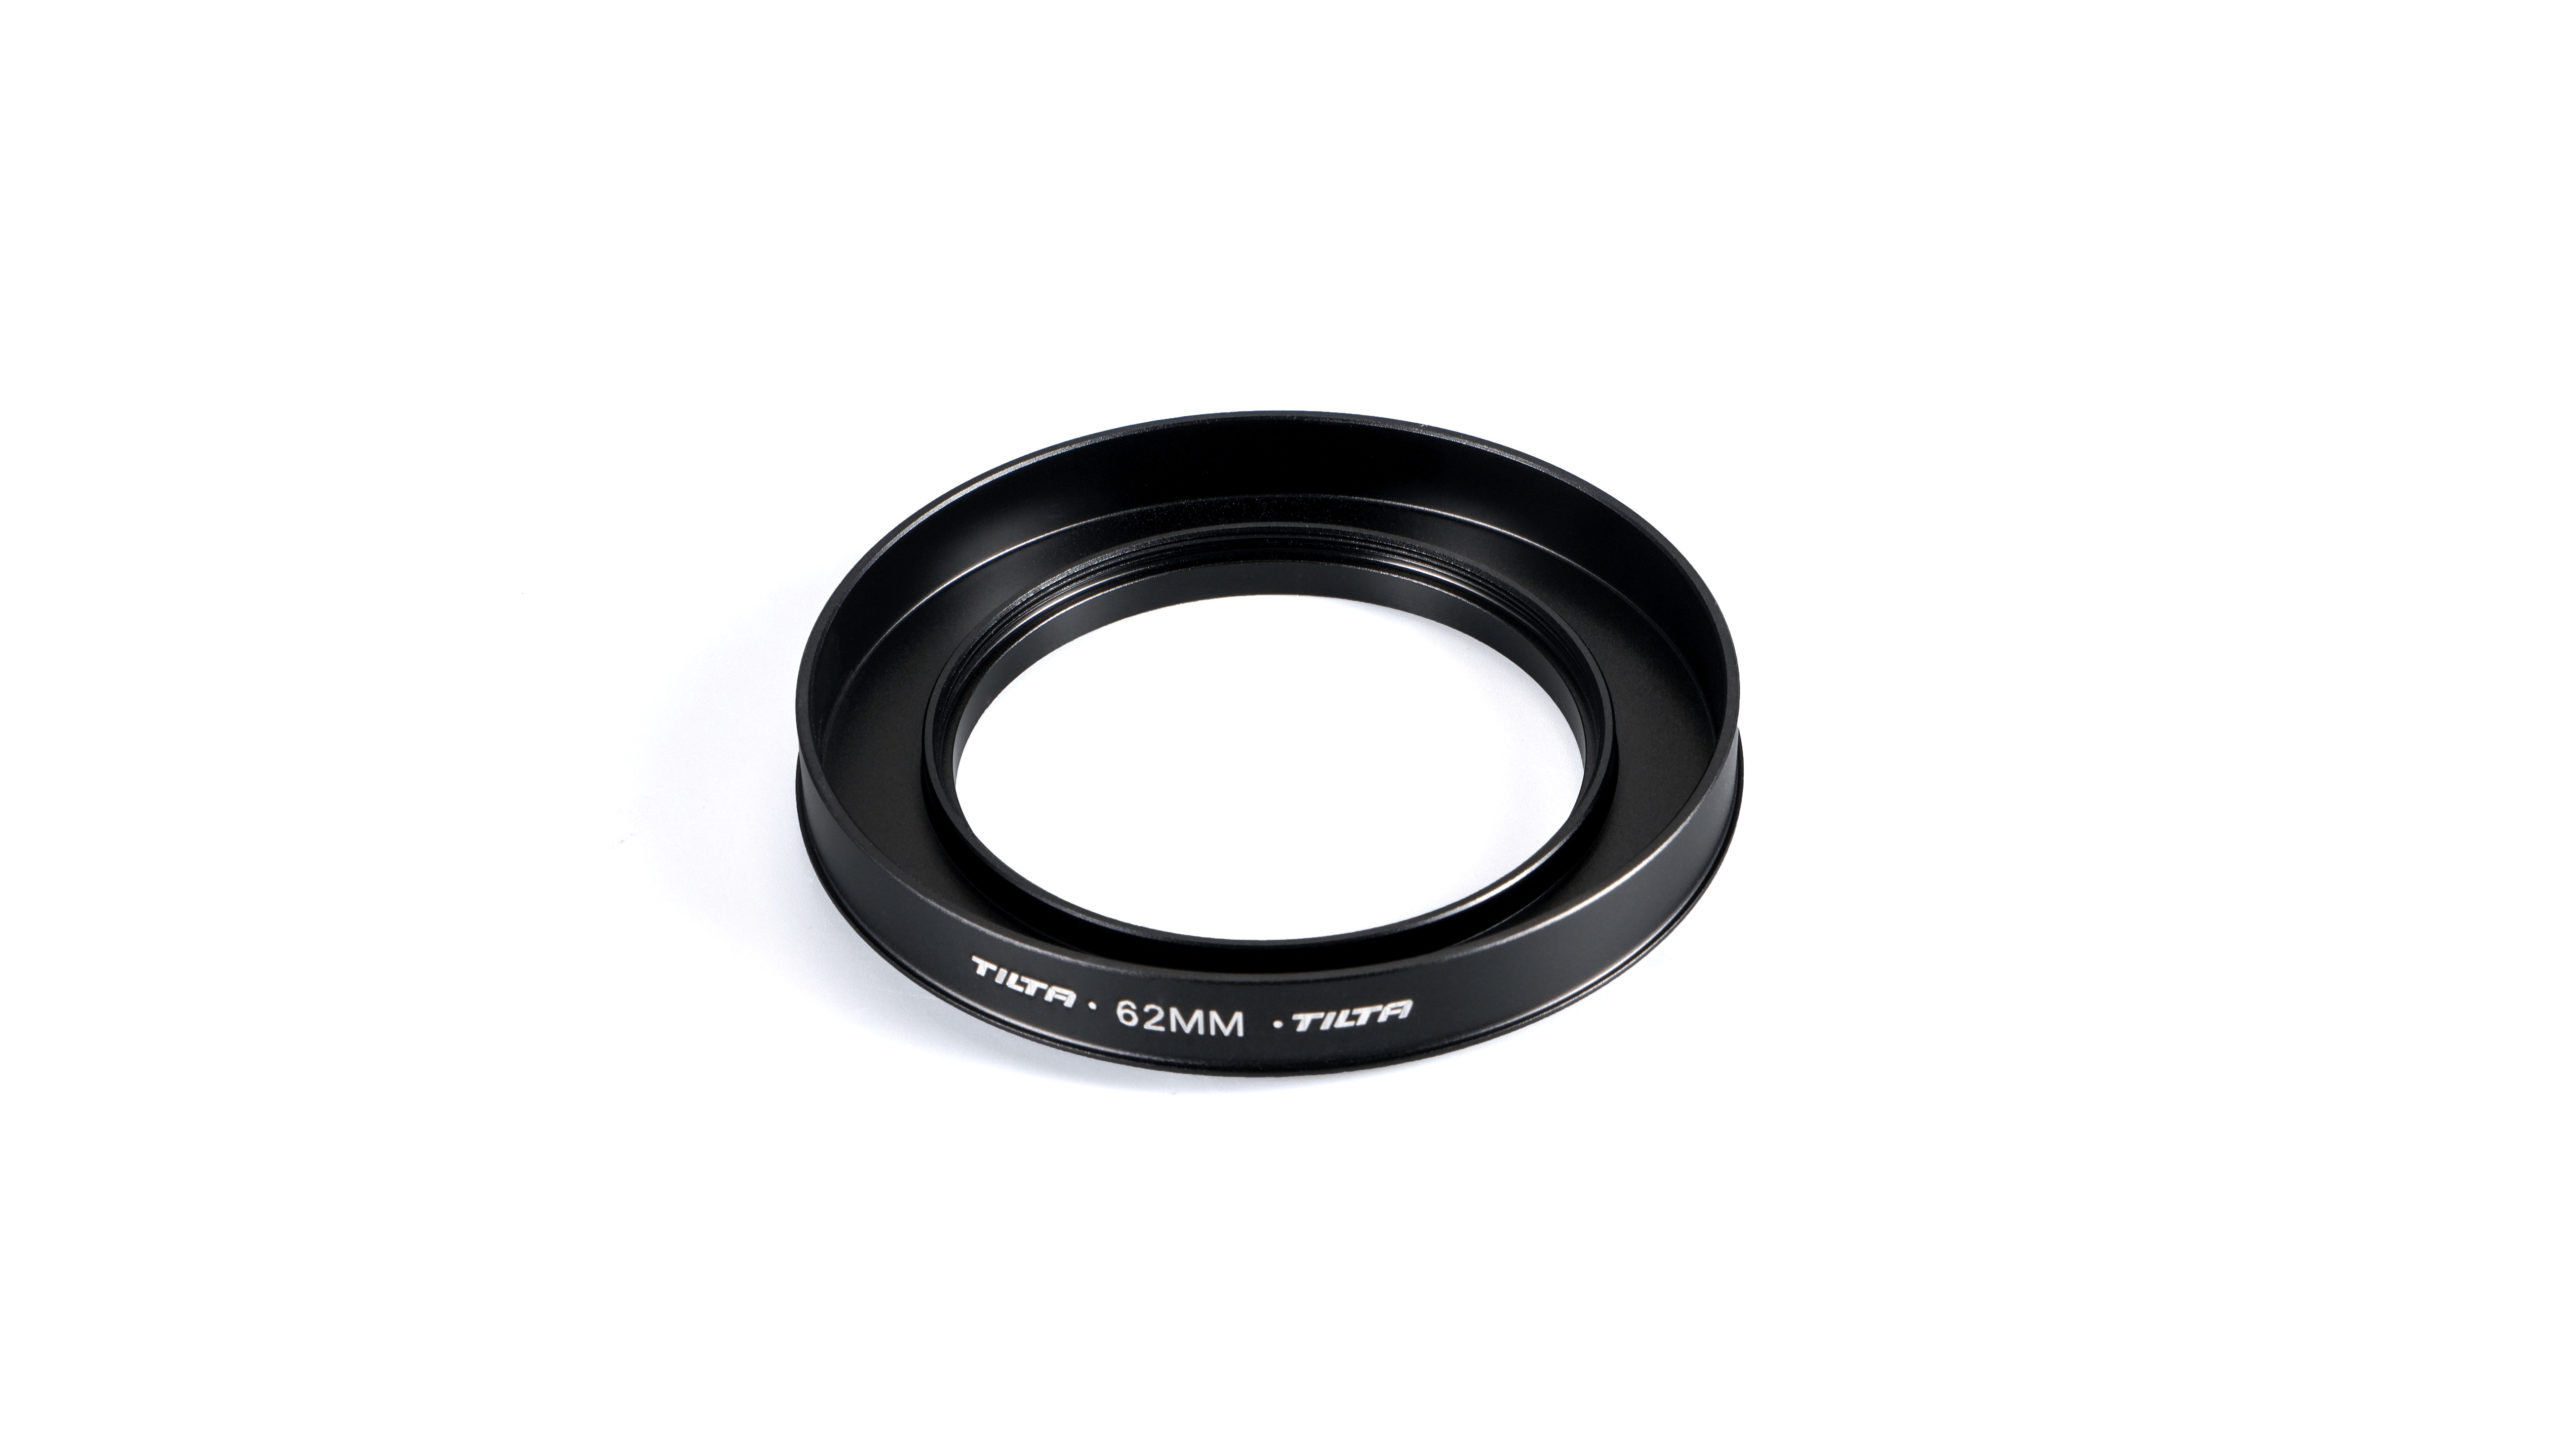 Adapter Ring for Mini Clamp-on Matte Box